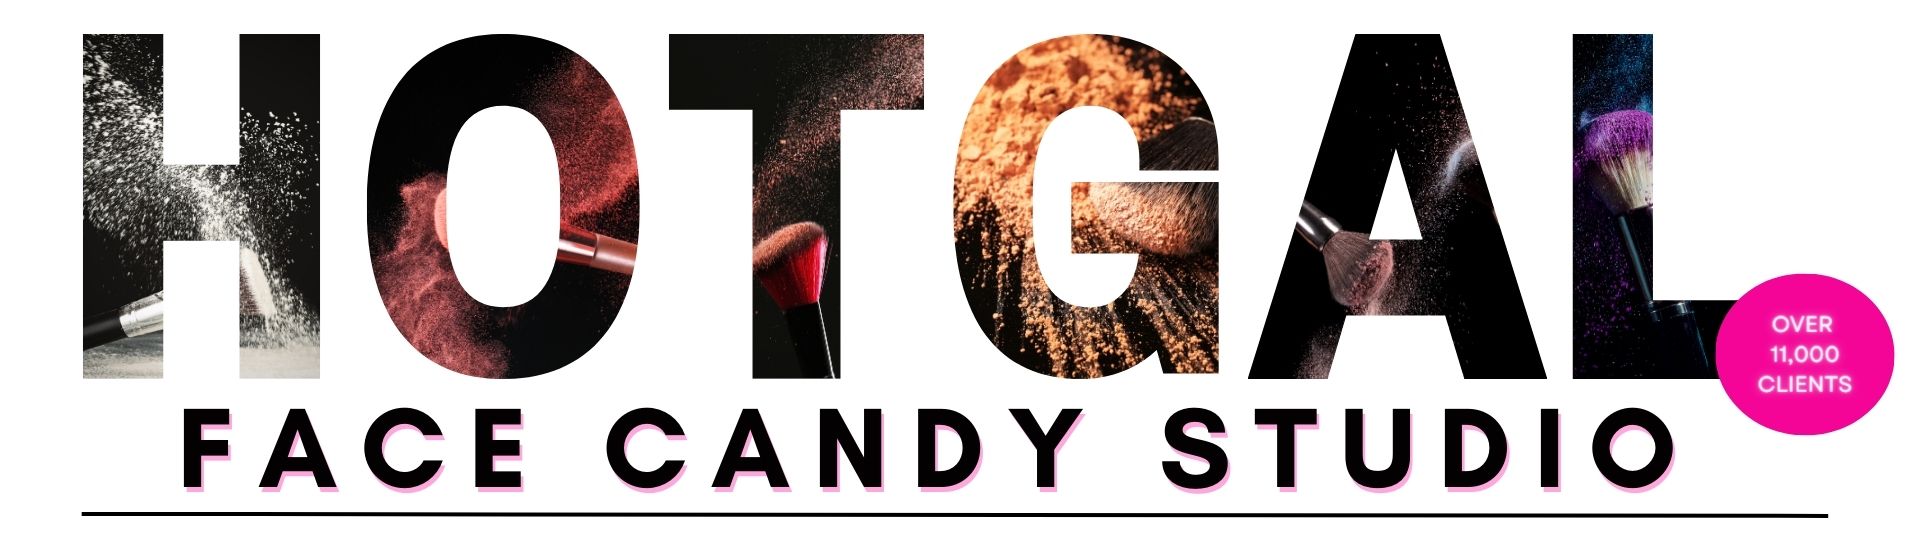 facecandystudio the brand hotgal - The Brand